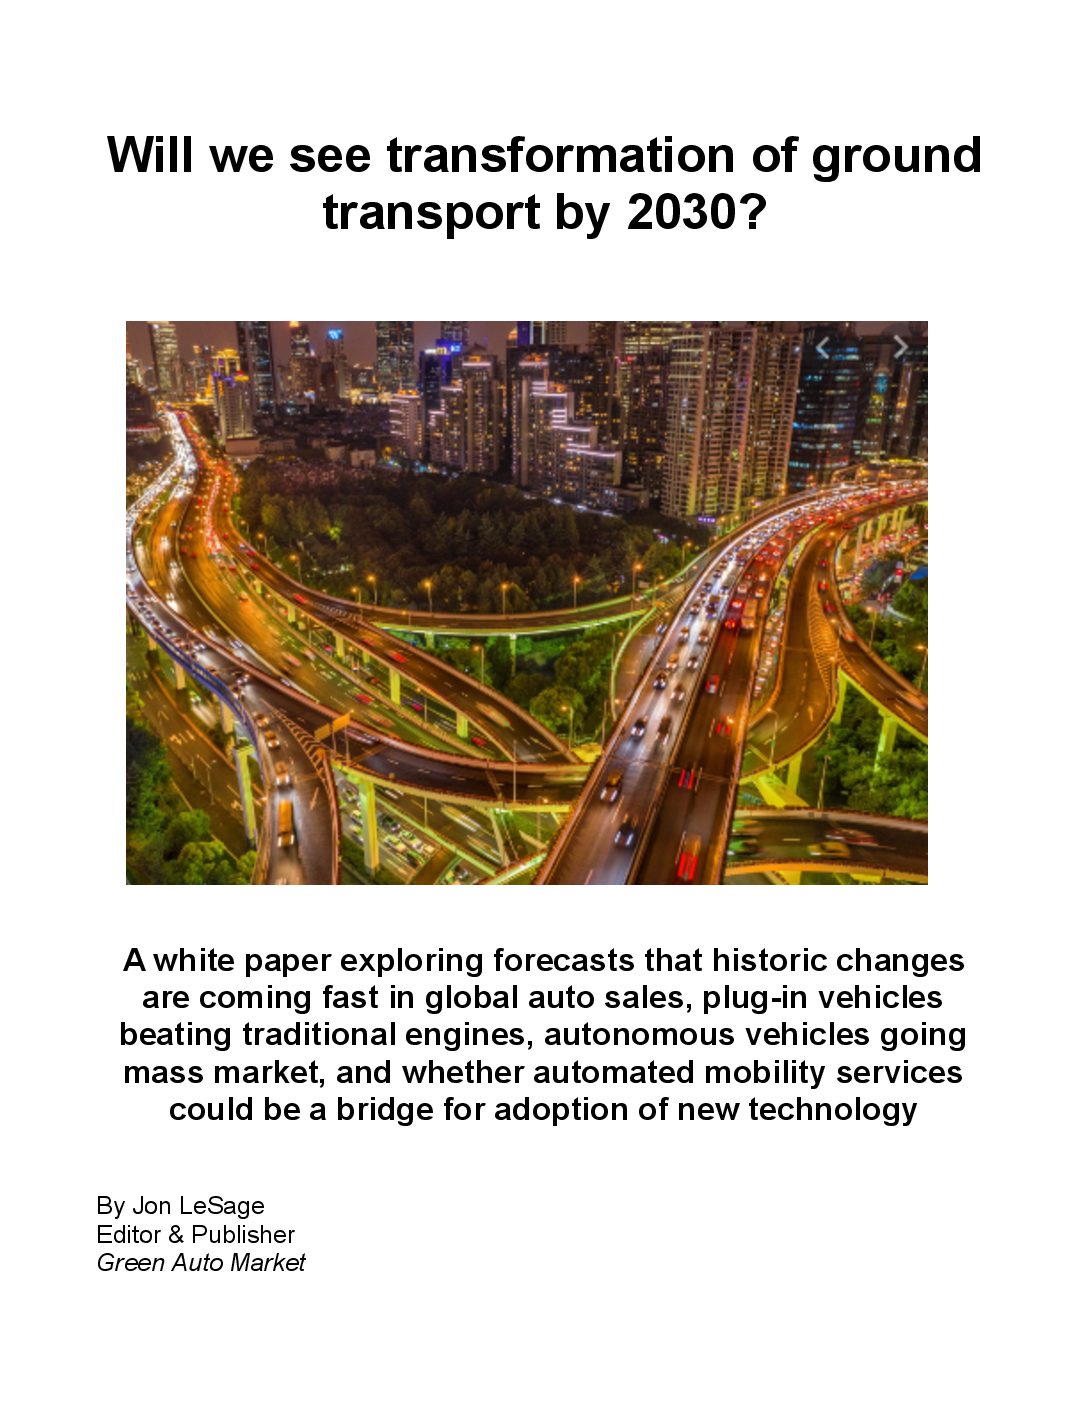 Will we see transformation of ground transport by 2030?